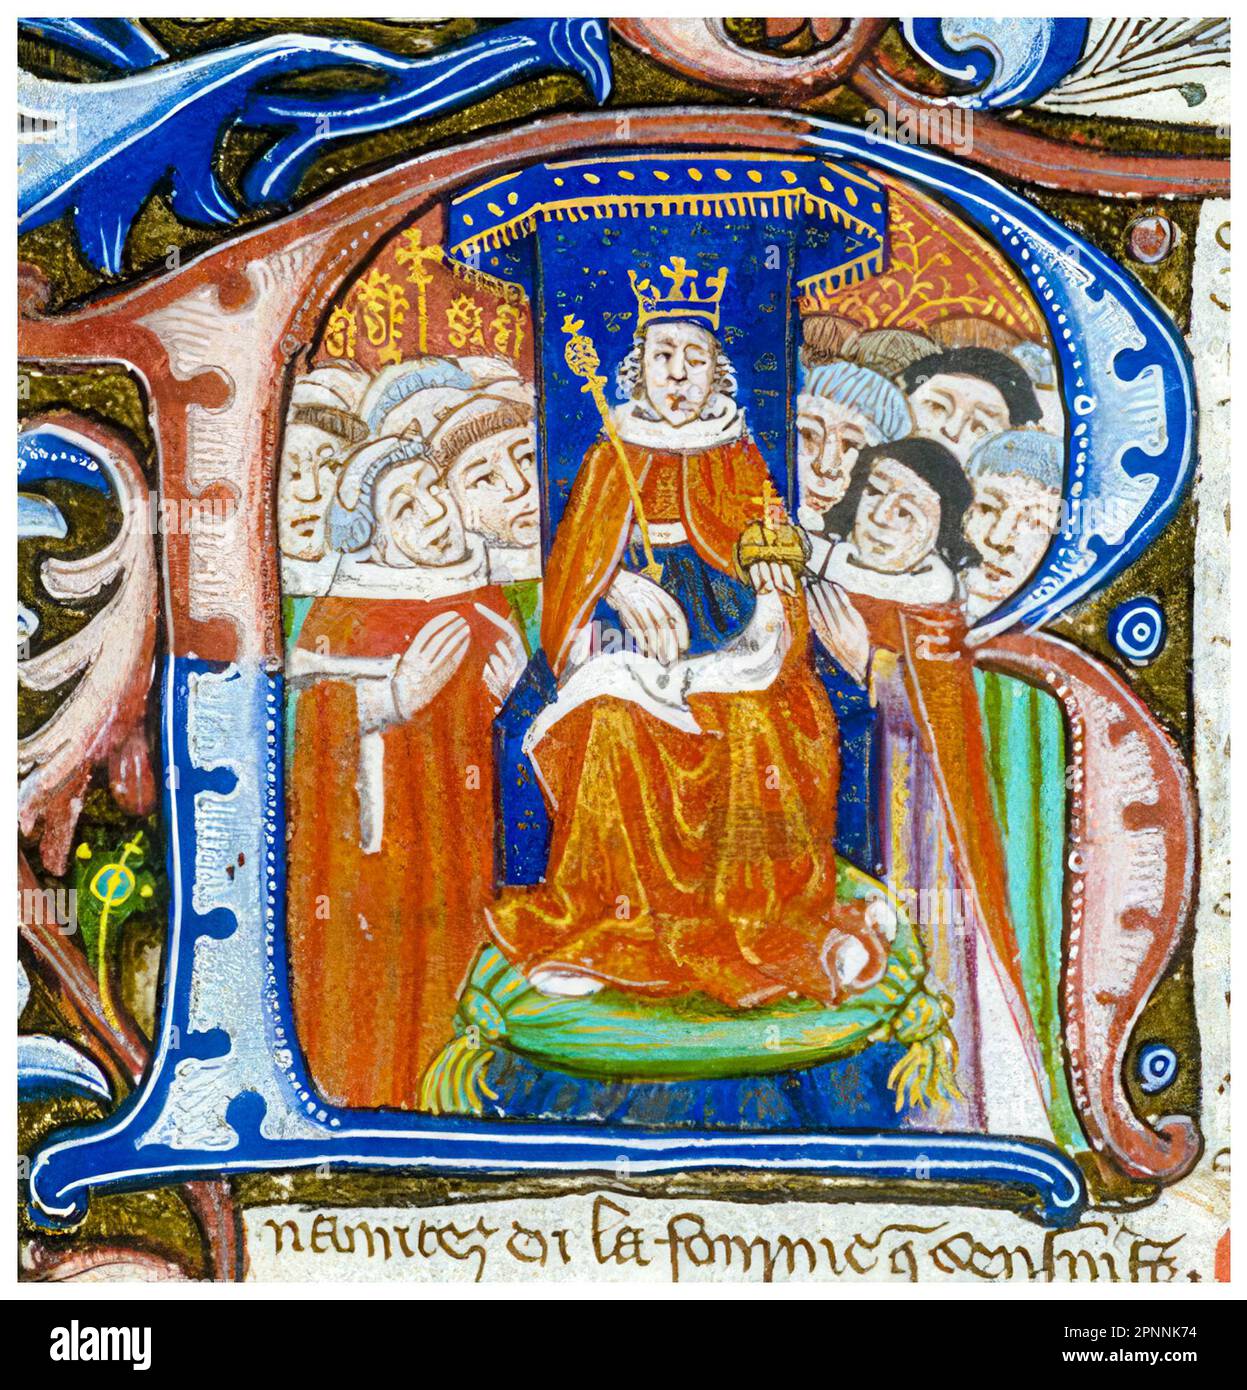 Richard III of England (1452-1485), King of England (1483-1485), enthroned wearing a crown, ermine robe and holding an orb and sceptre, illustrated in an historiated initial R, miniature illuminated manuscript portrait painting, 1488-1489 Stock Photo